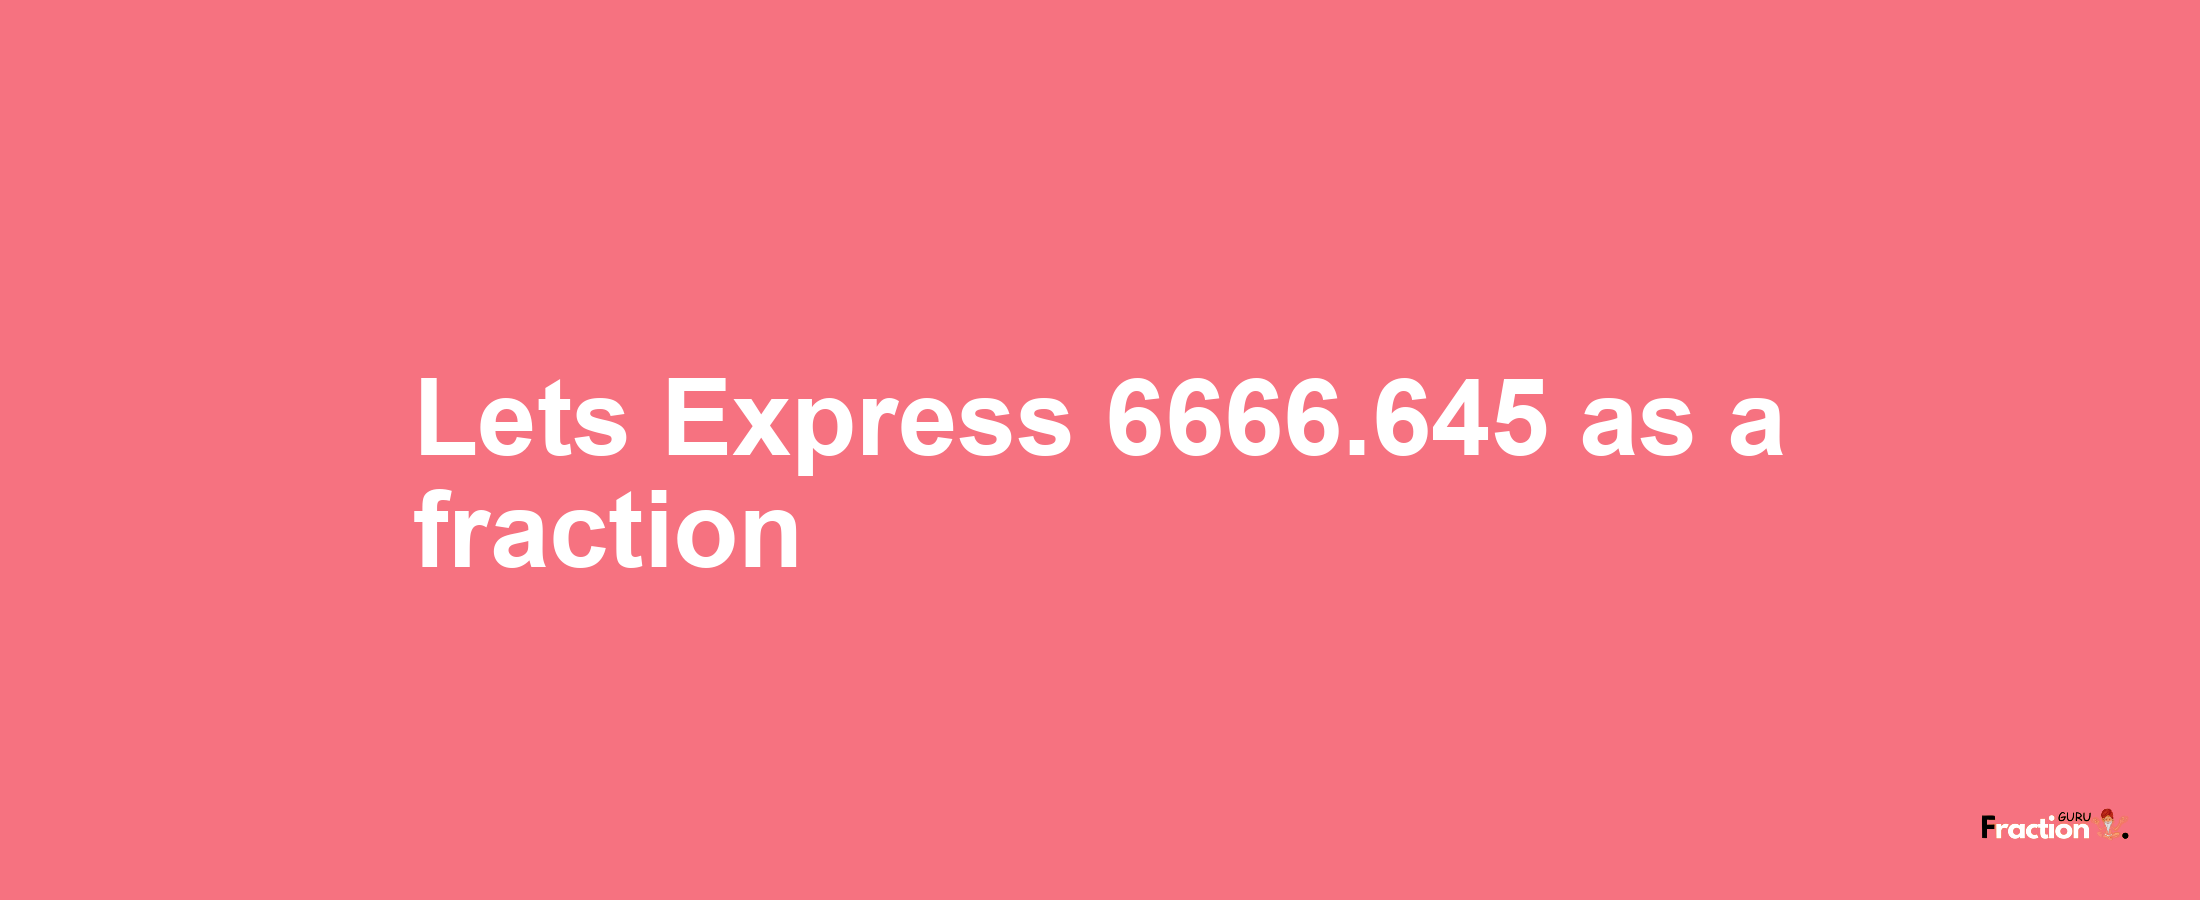 Lets Express 6666.645 as afraction